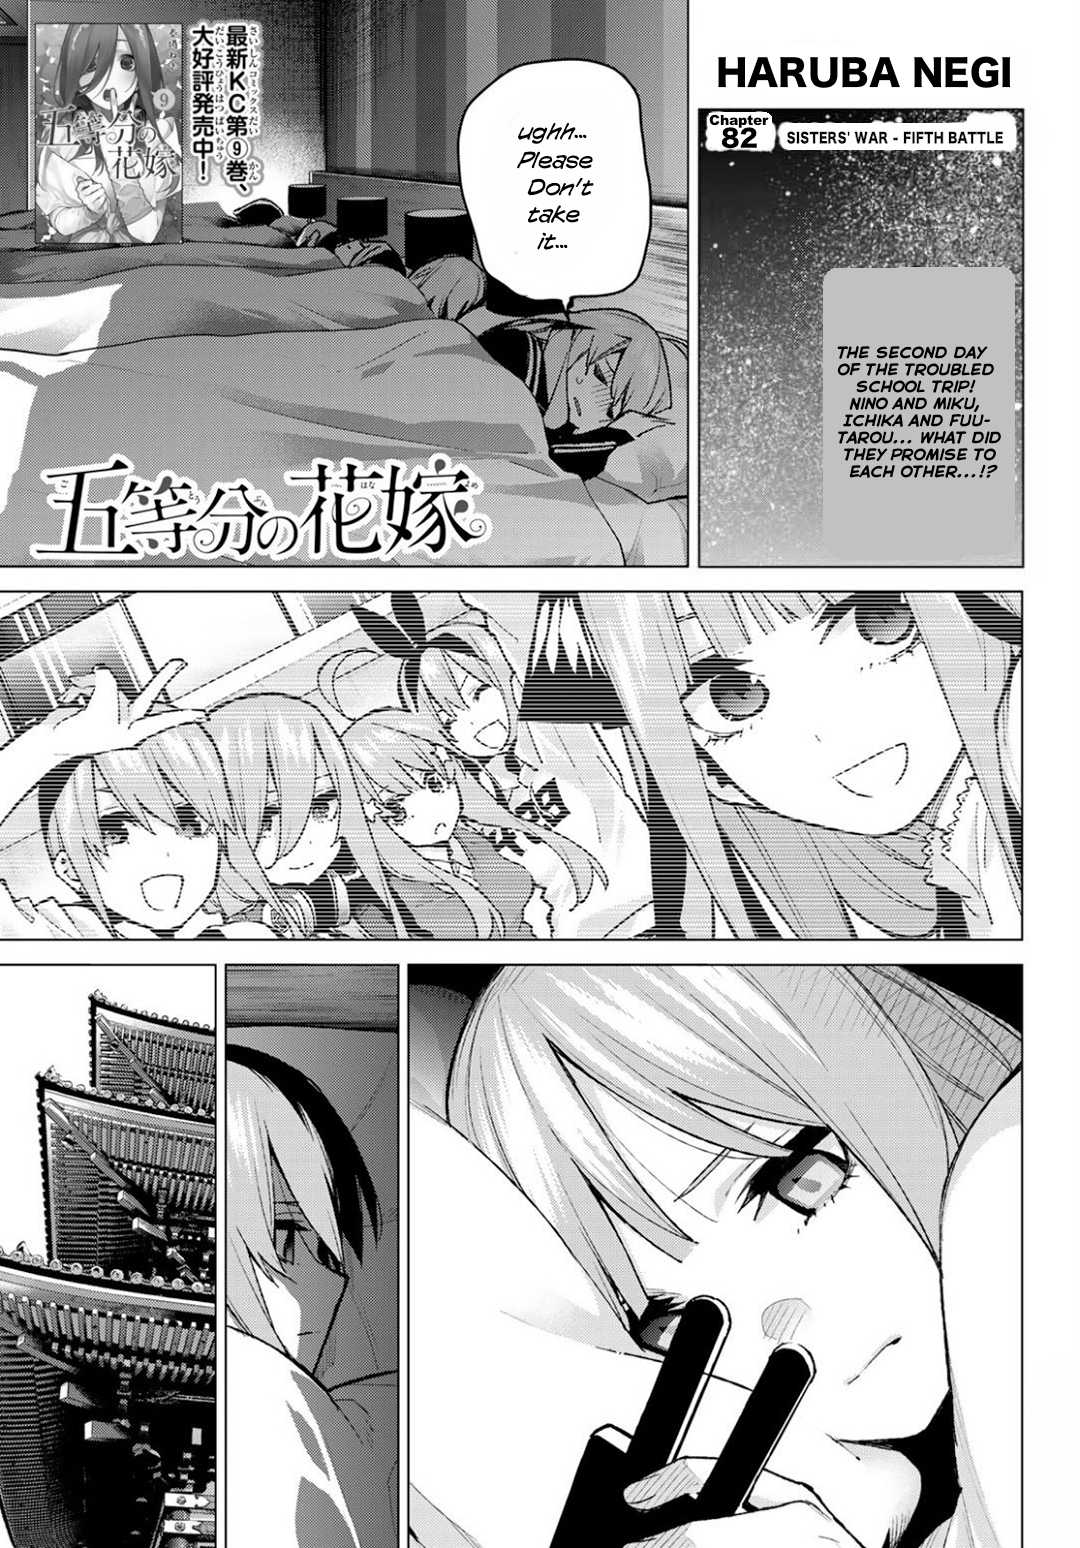 Go-Toubun No Hanayome Chapter 82: - Sisters’ War - Fifth Battle - Picture 1